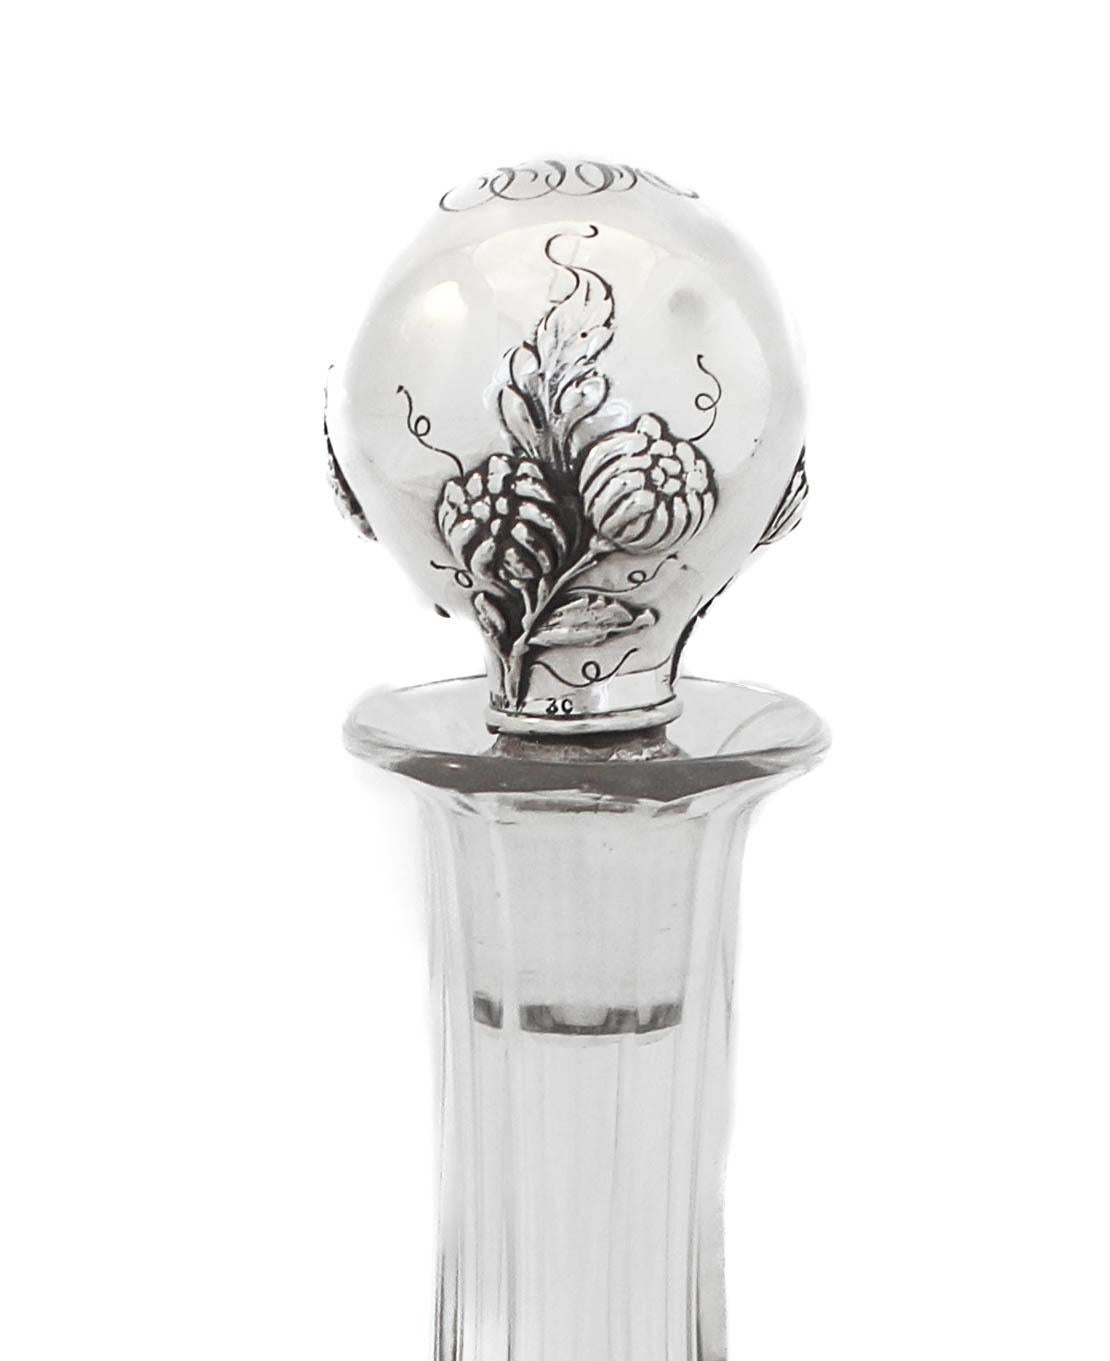 We are thrilled to offer you this sterling silver and crystal decanter made by Gorham Silversmiths of Providence, Rhode Island. The sterling silver stopper is in the Art Nouveau style that was at its most popular. The crystal decanter has a hexagon